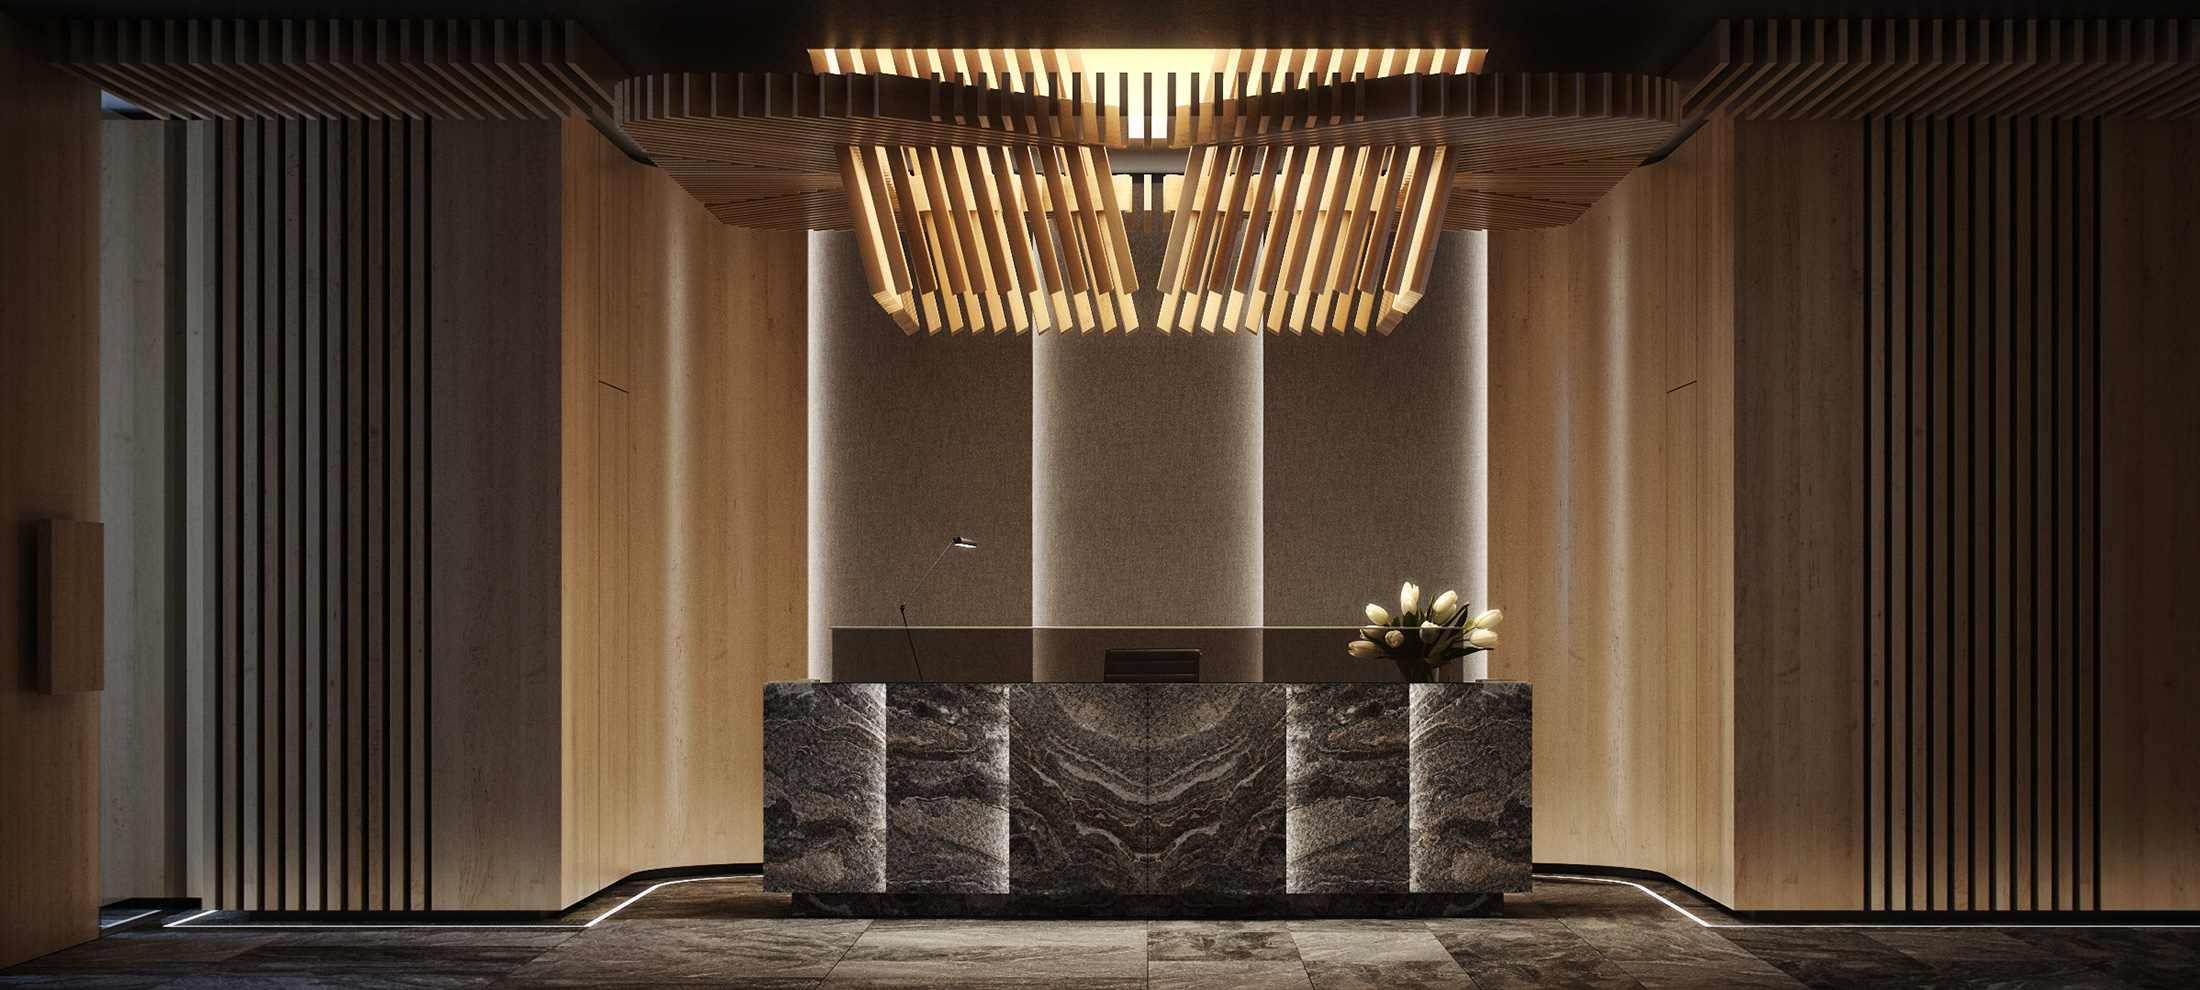 In a celebration of materiality and craftsmanship, NOBU will rise as a sanctuary dedicated to thoughtful sophisticated living.